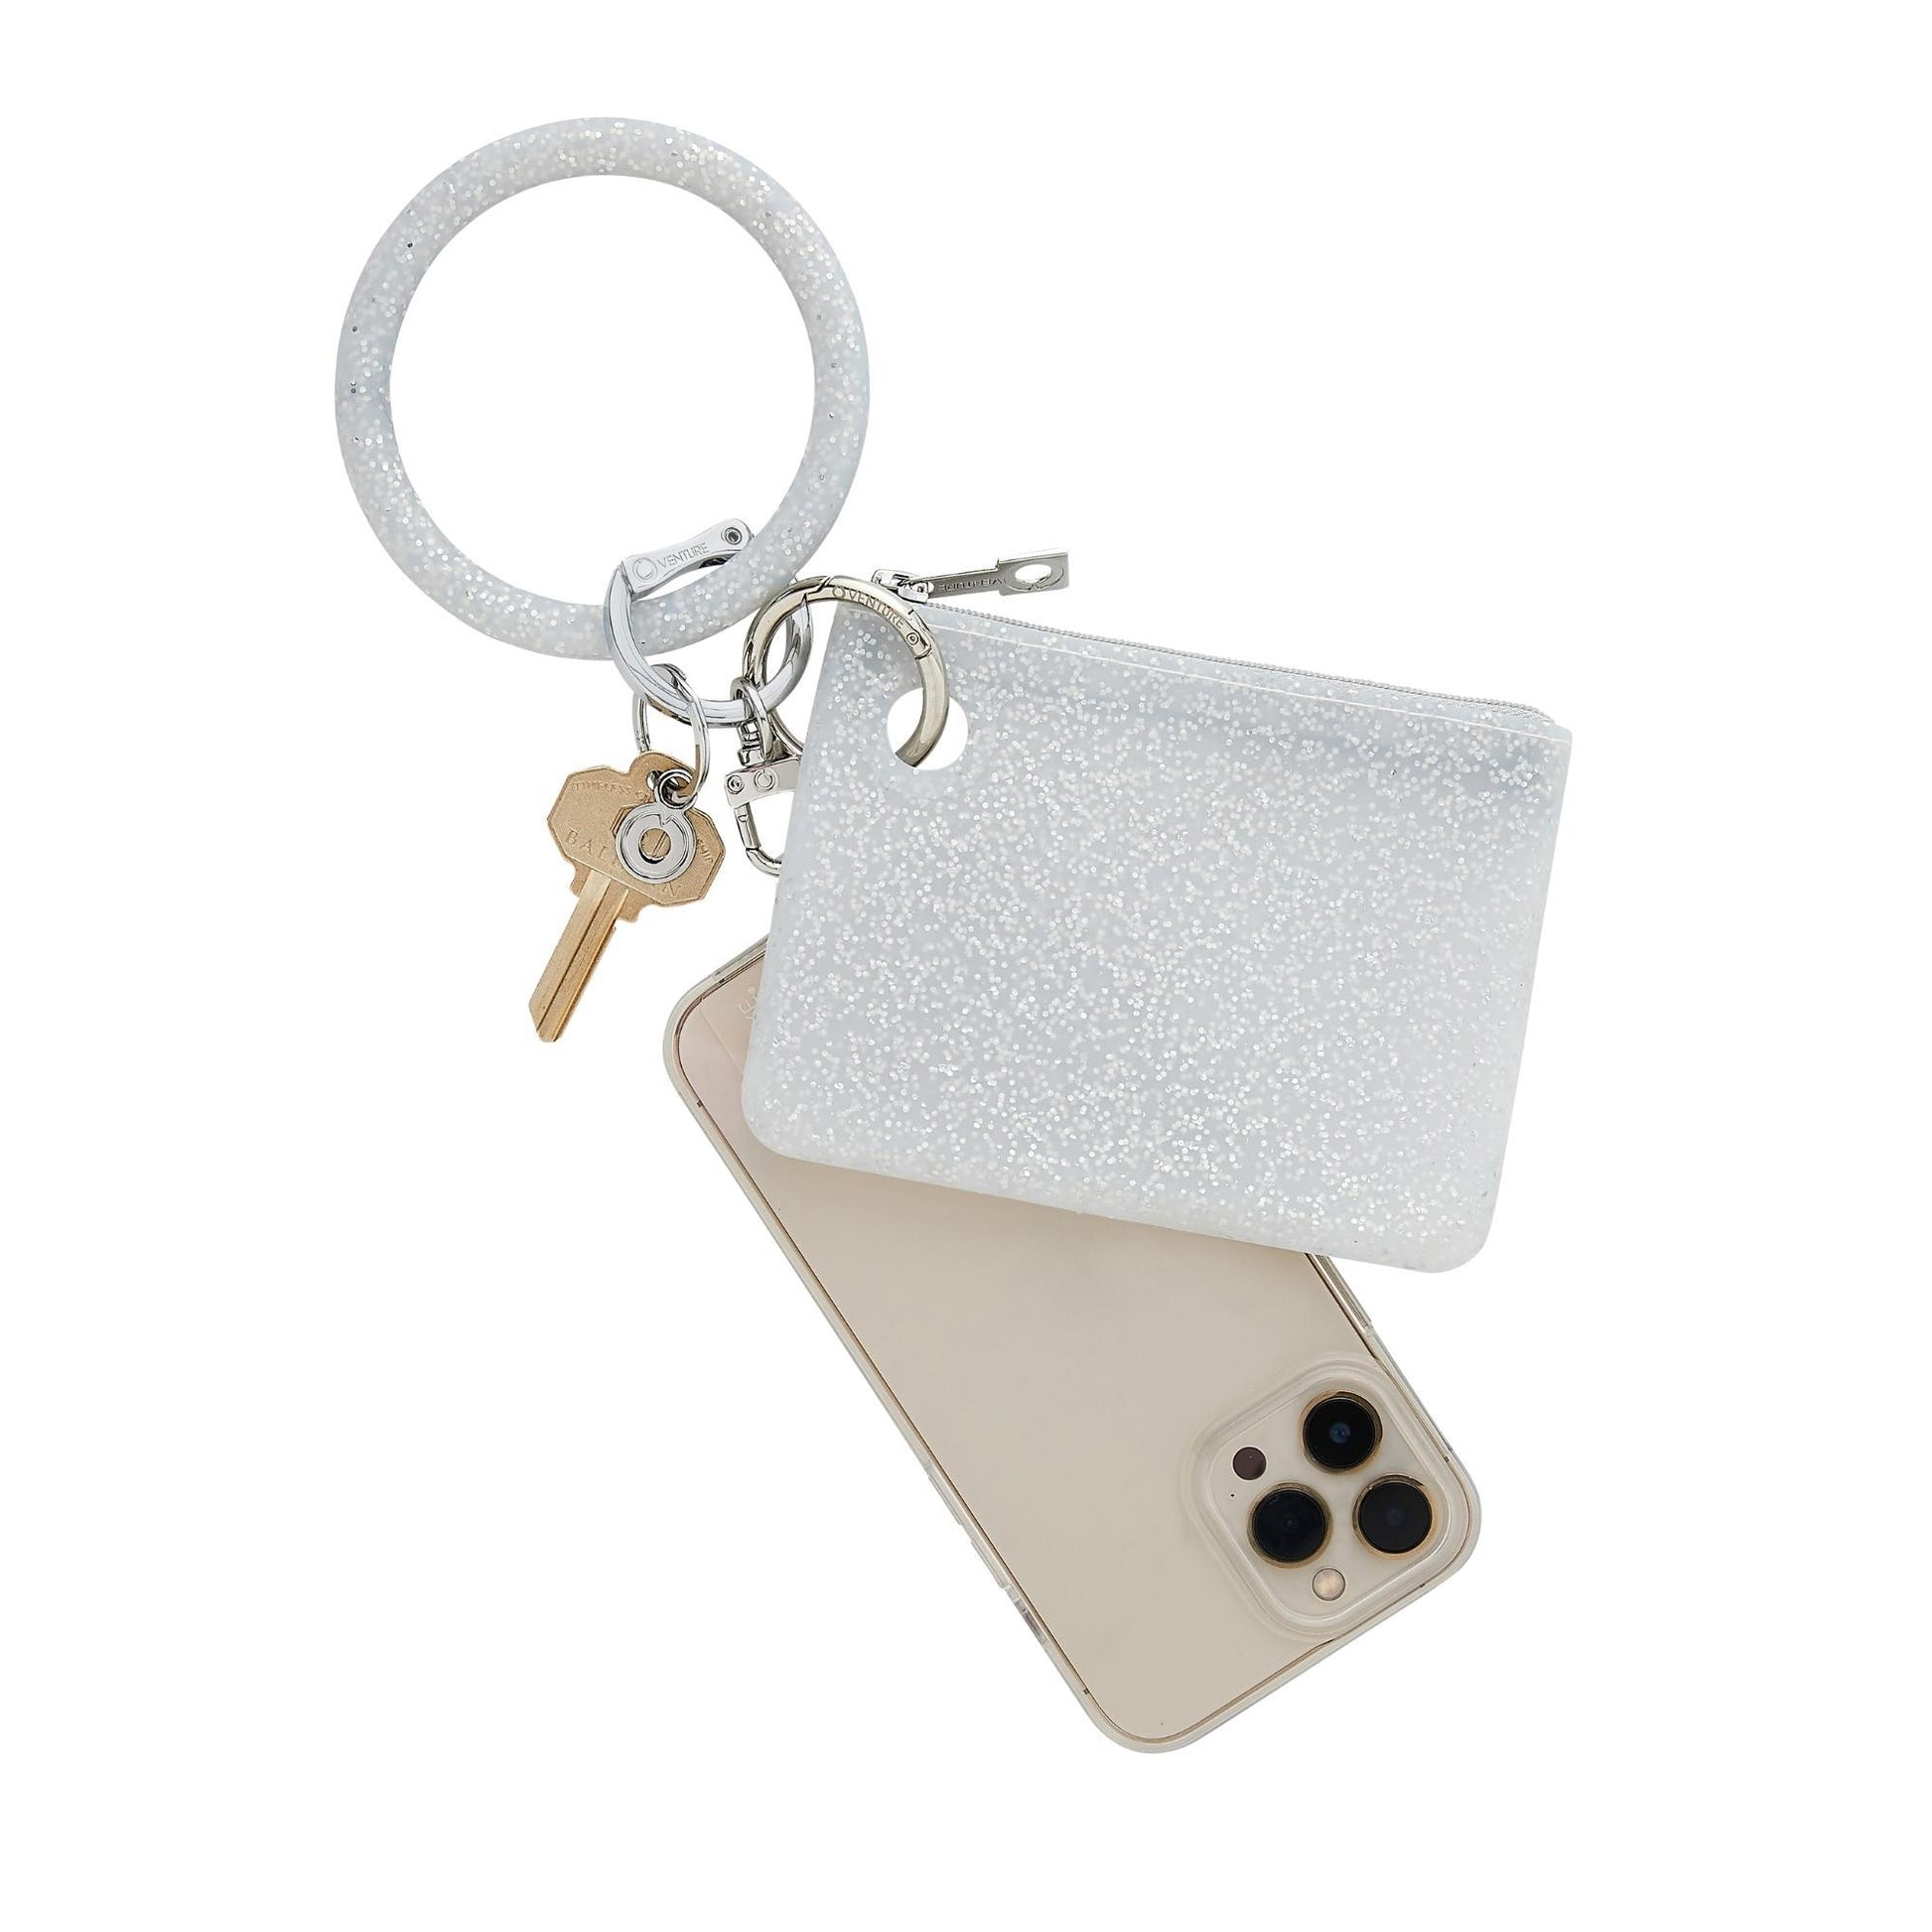 Stylish Mini Pouch Wristlet for Essentials and Phone